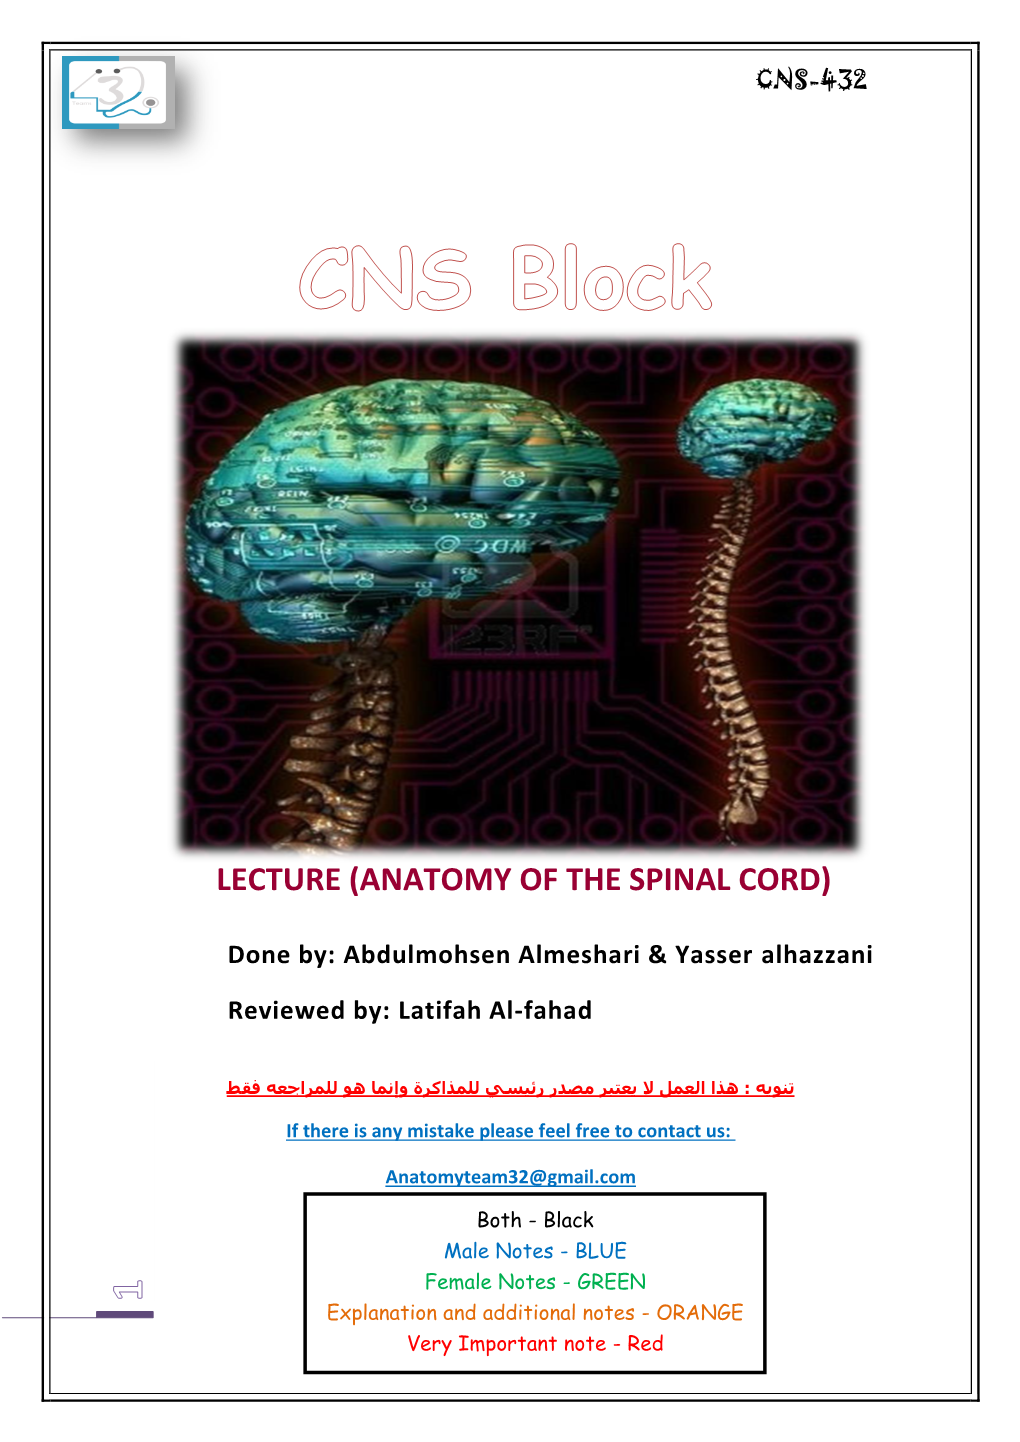 Lecture (Anatomy of the Spinal Cord)